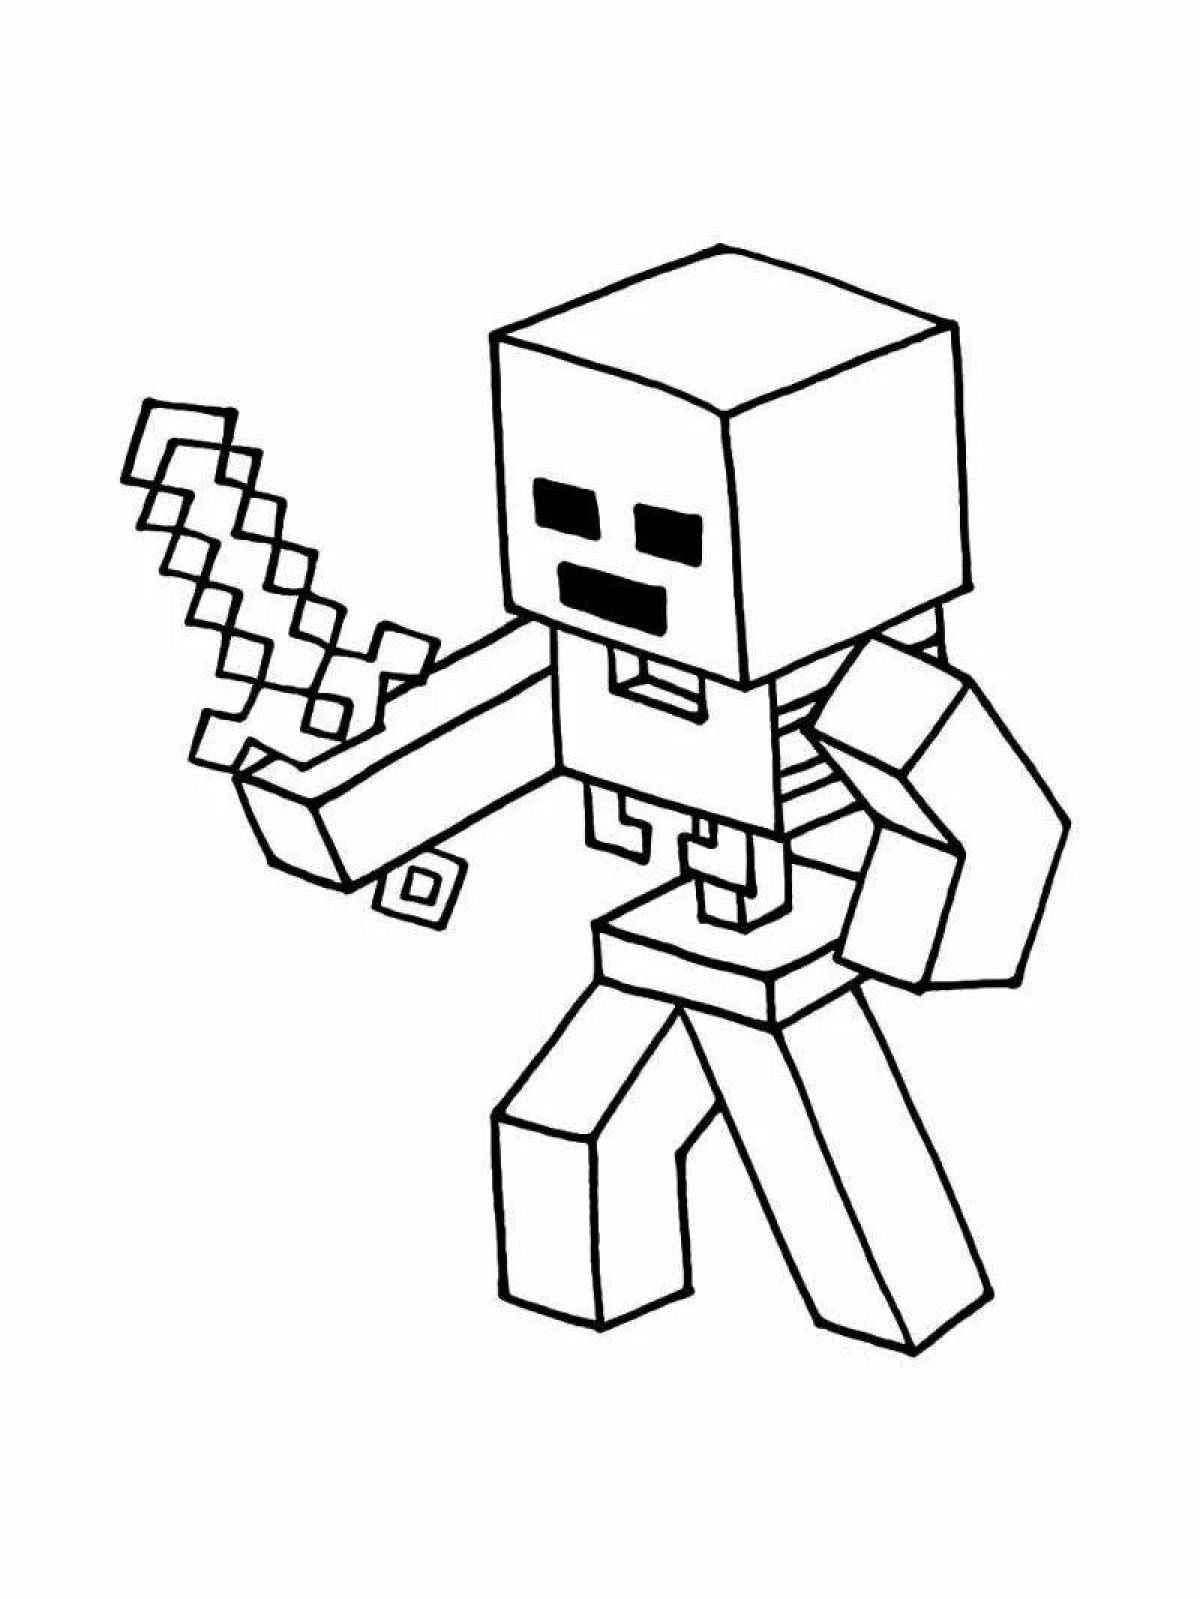 Fancy spider minecraft coloring page